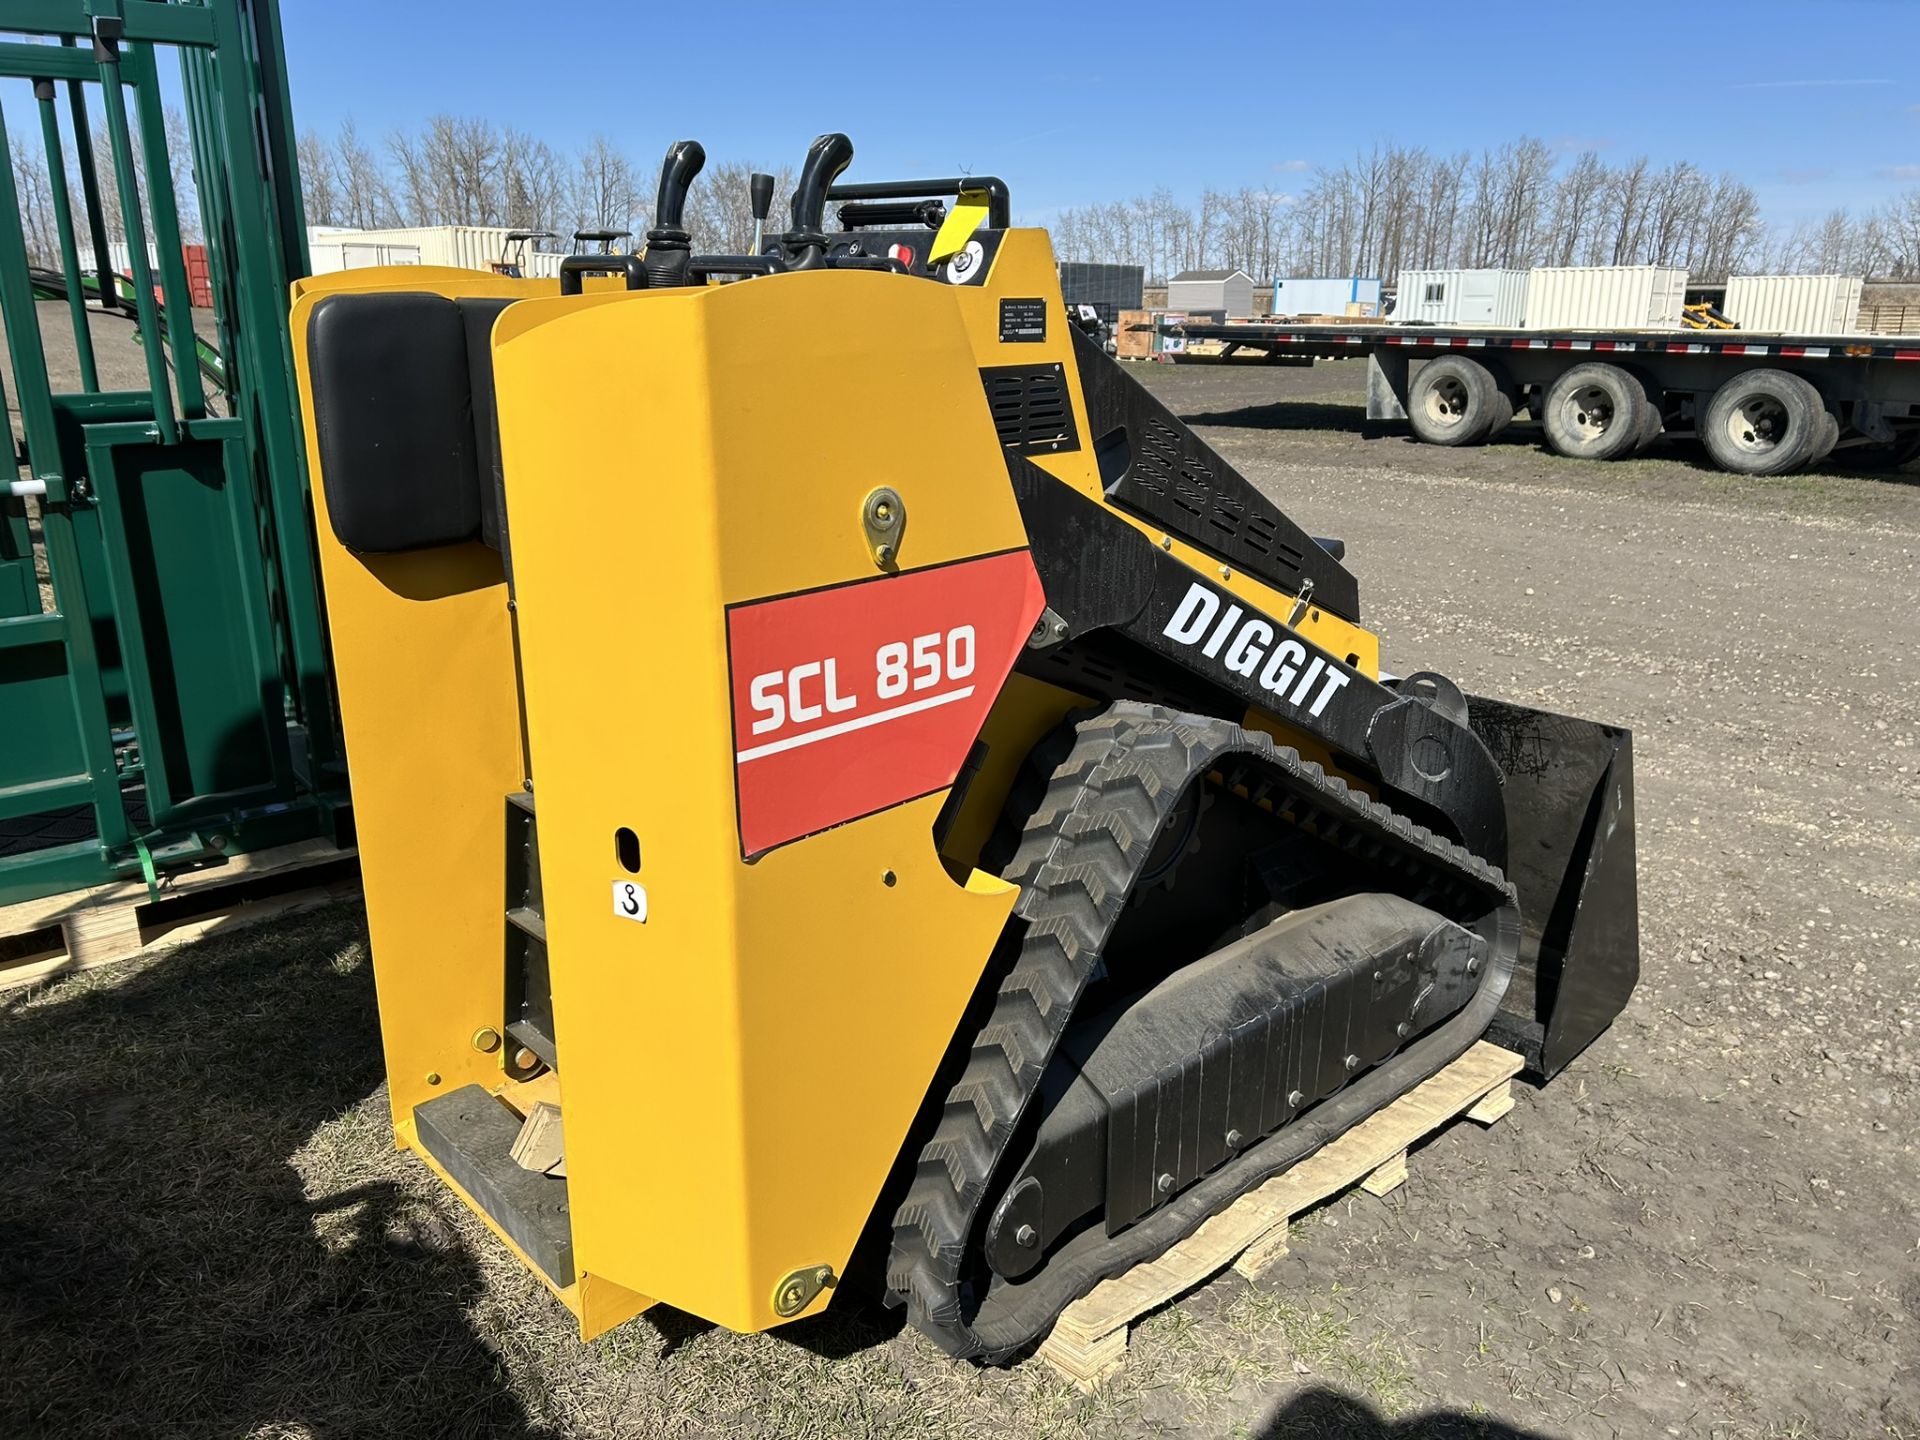 2024 DIGGIT SCL 850 MINI SKID STEER W/ RUBBER TRACKS S/N SCL8505623864 - Image 3 of 8